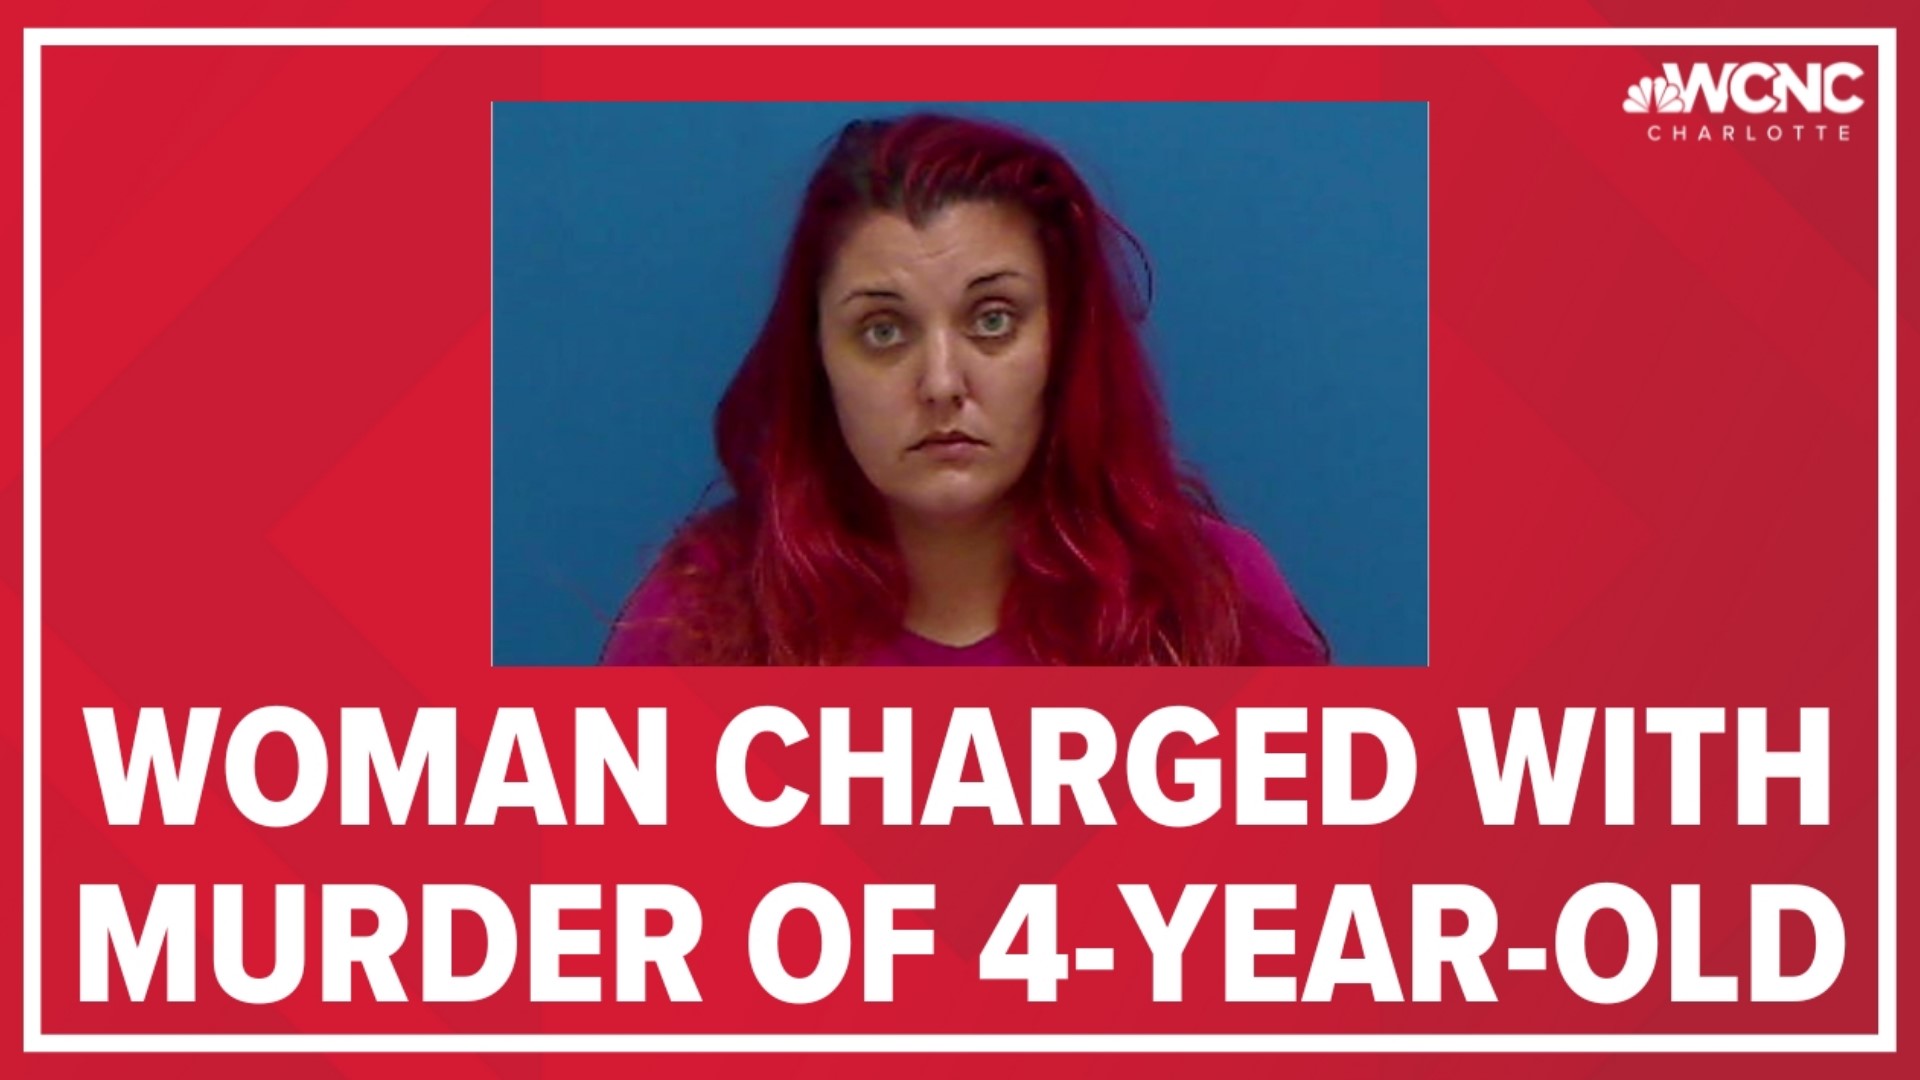 A woman has been charged with murder in the death of 4-year-old Hazel Lidey, Catawba County officials announced Friday.